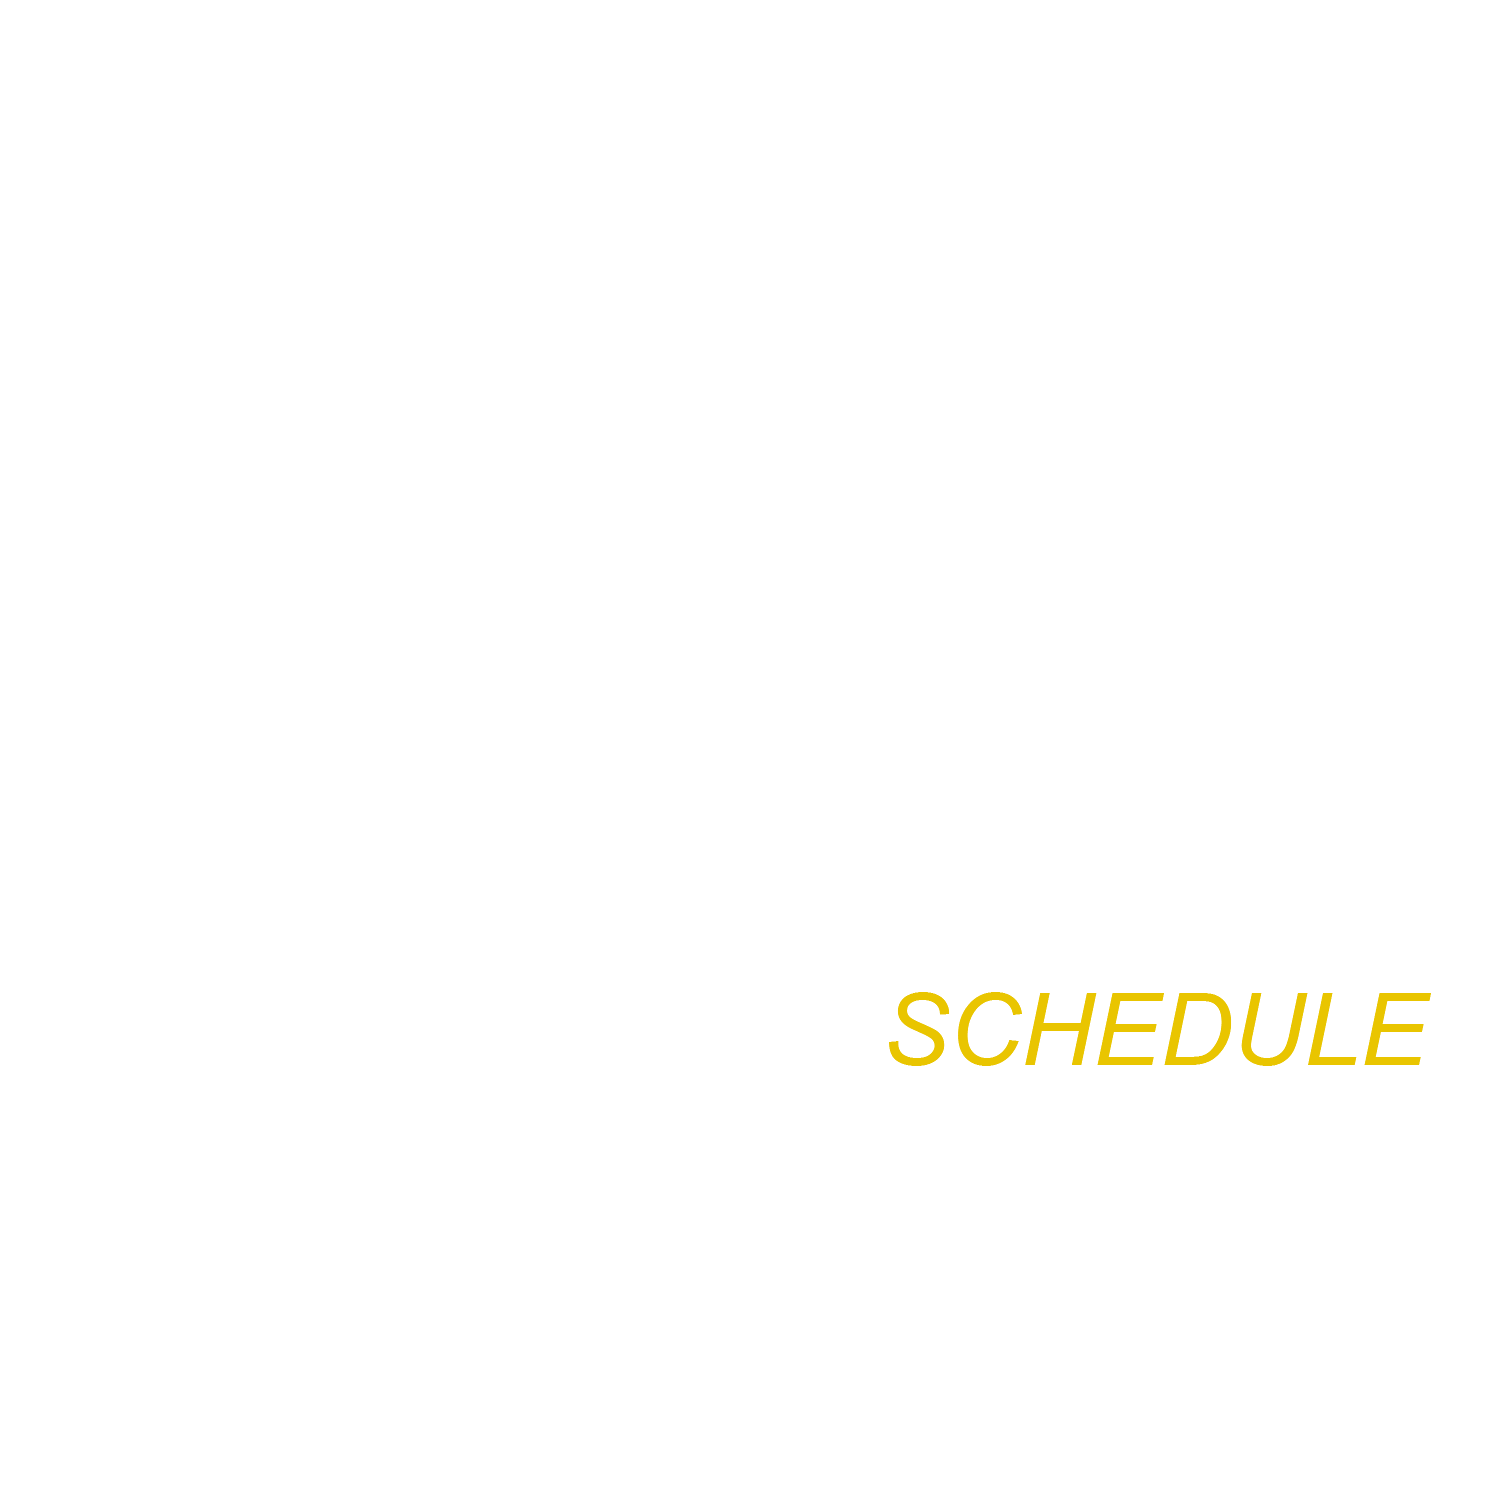 In this article, we share the updated IPL 2022 schedule and player list.